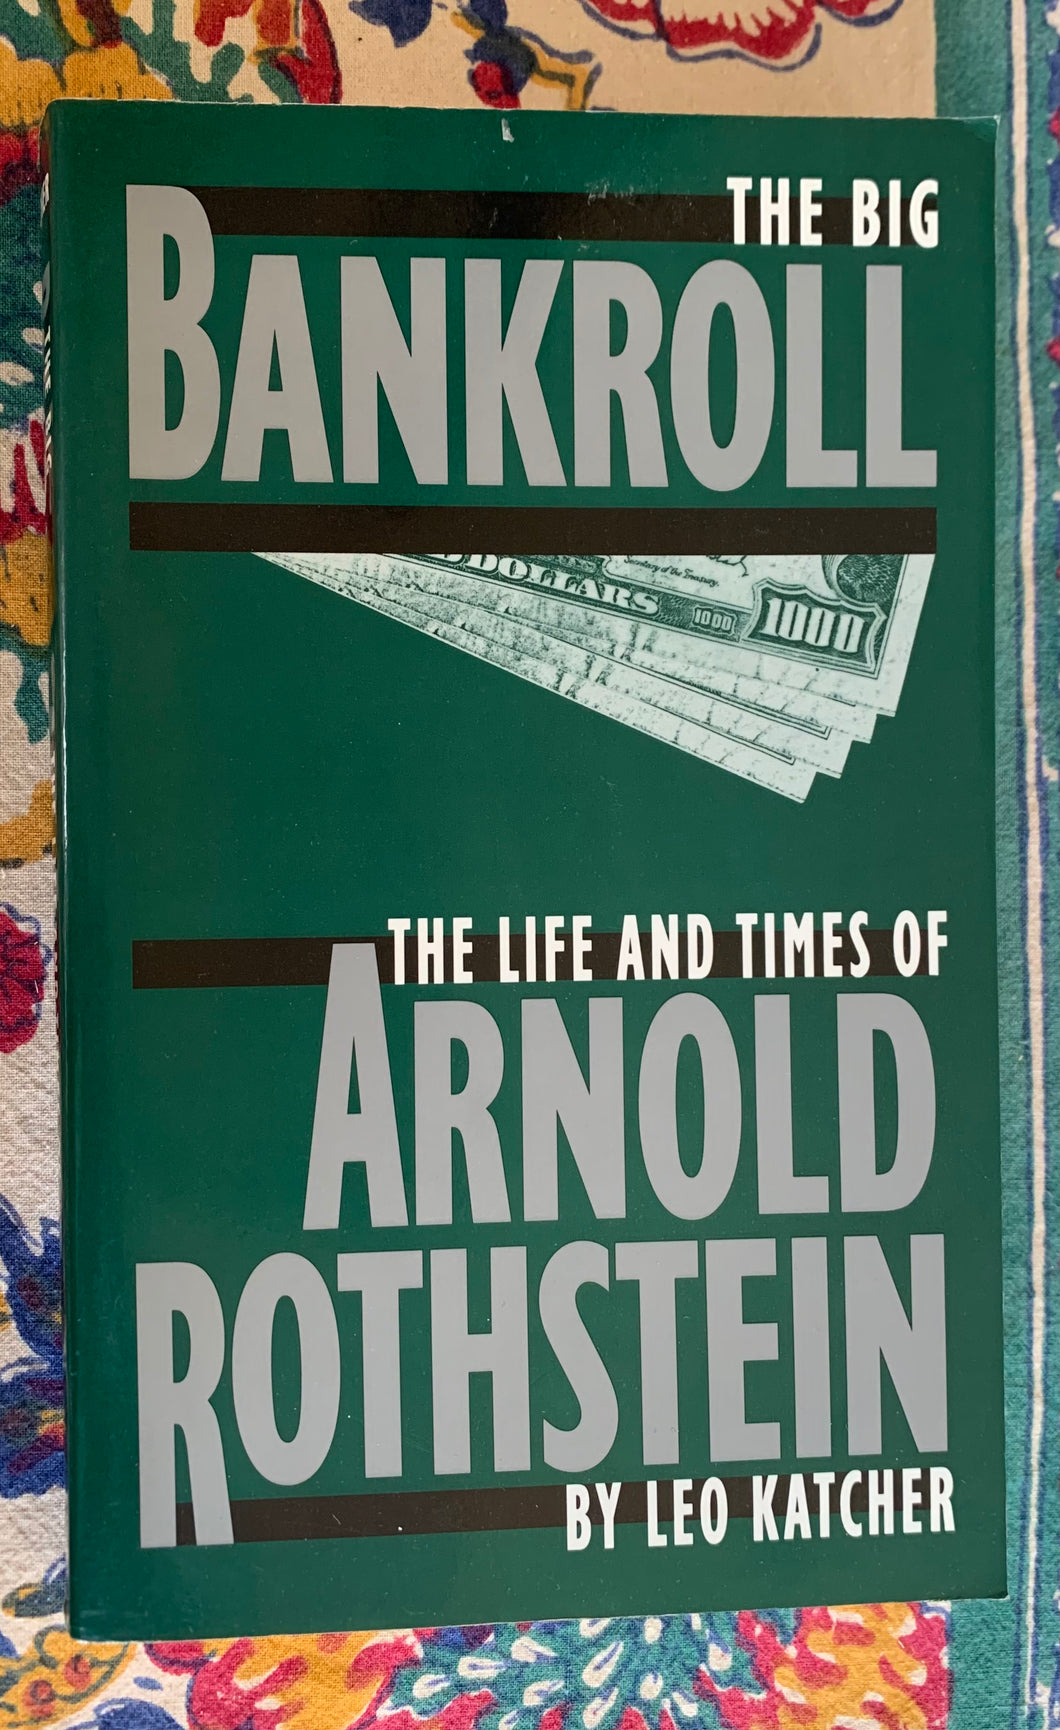 The Big Bankroll: The Life And Times Of Arnold Rothstein